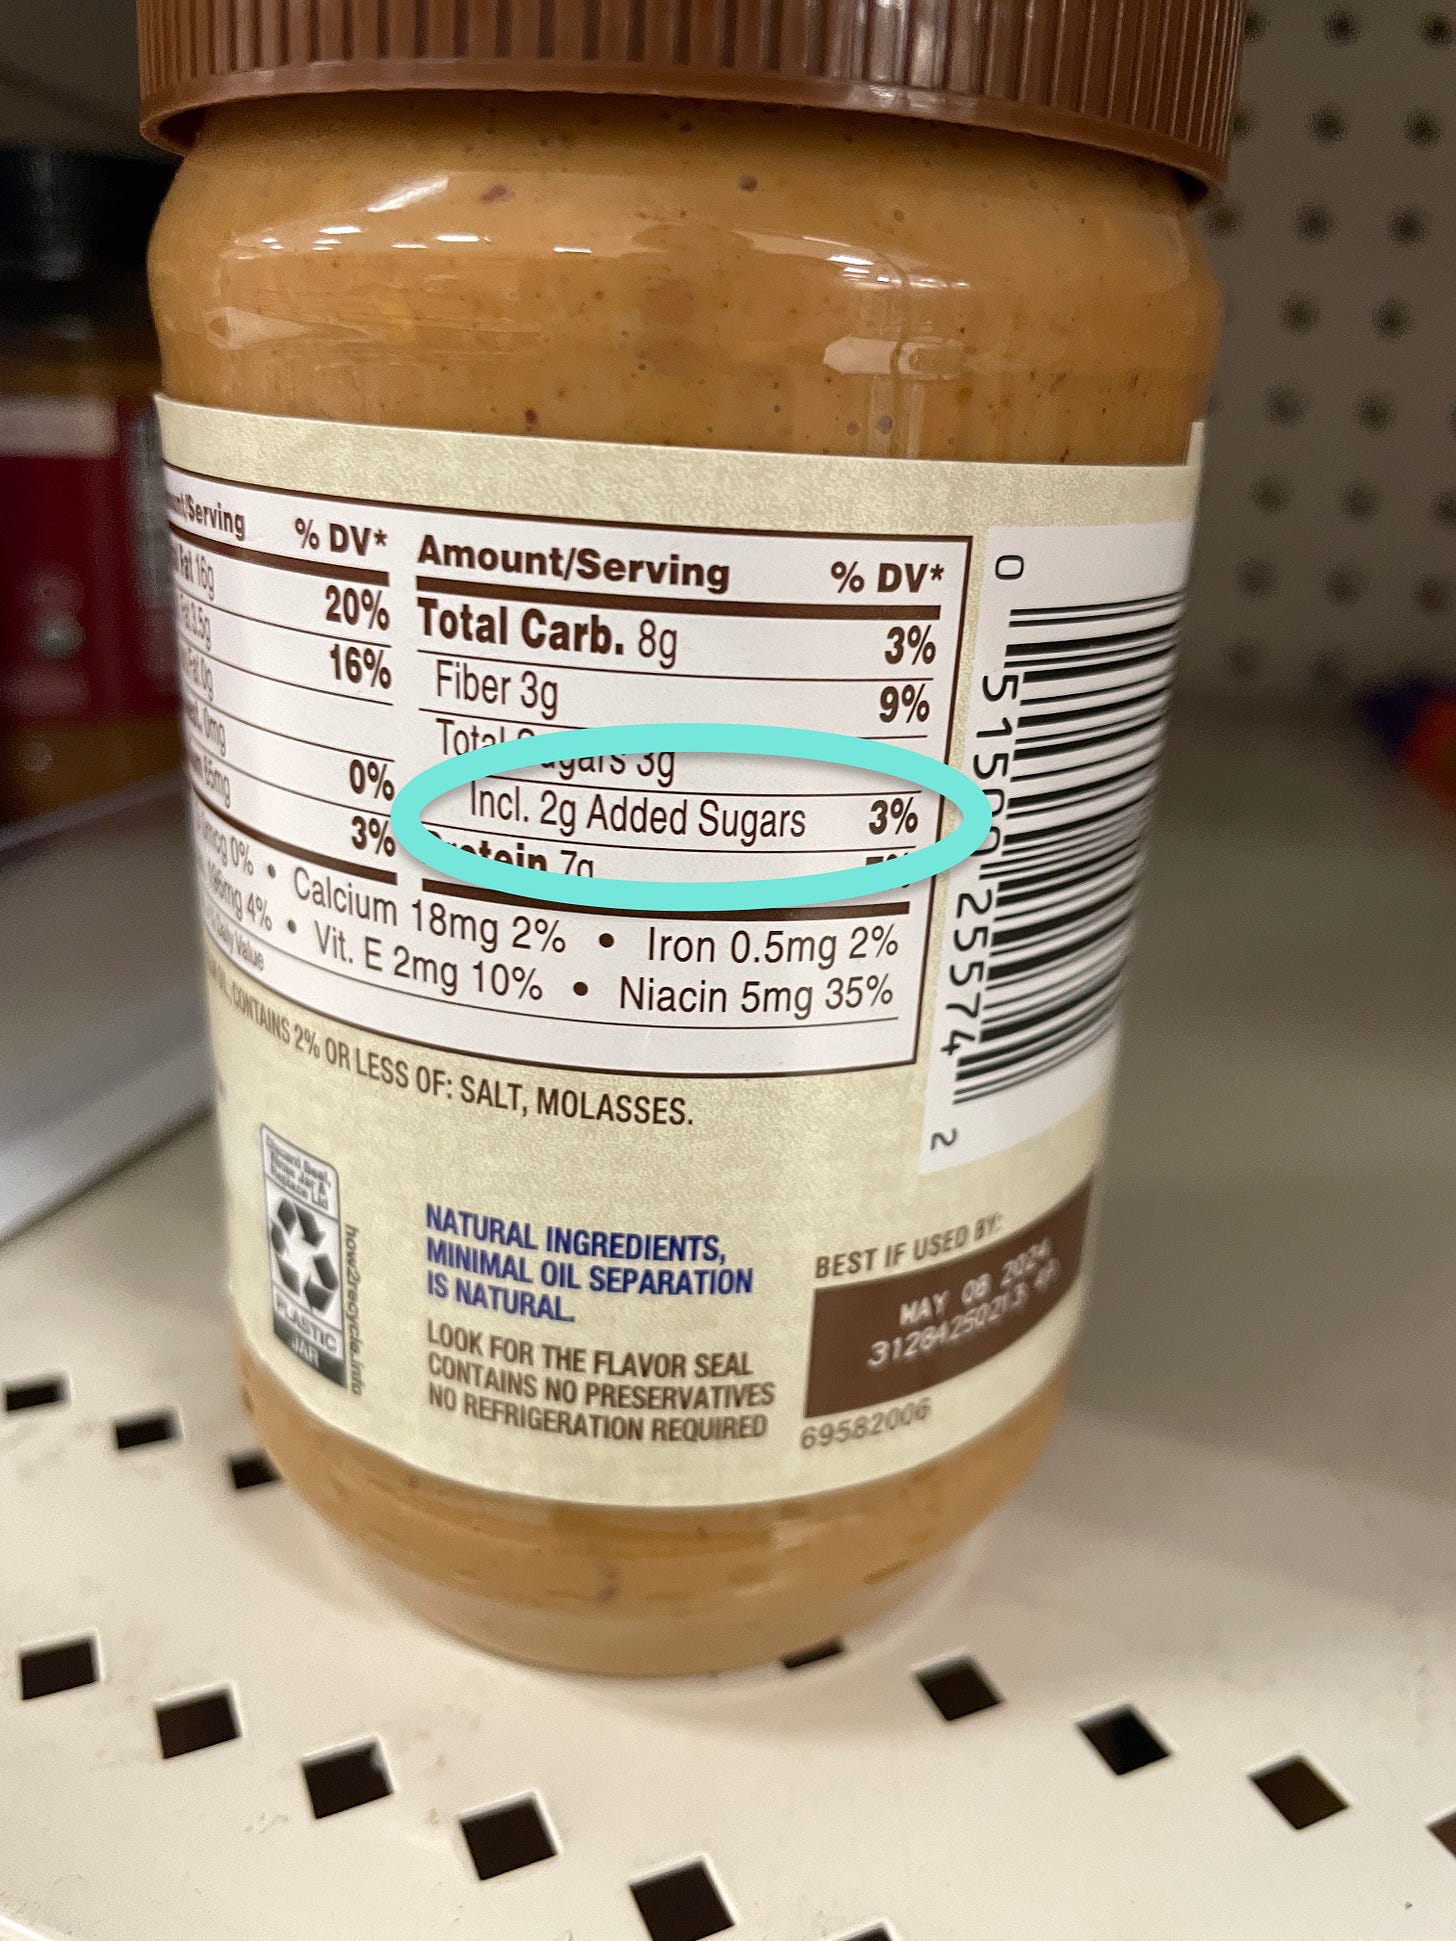 Peanut butter container highlighting added sugars